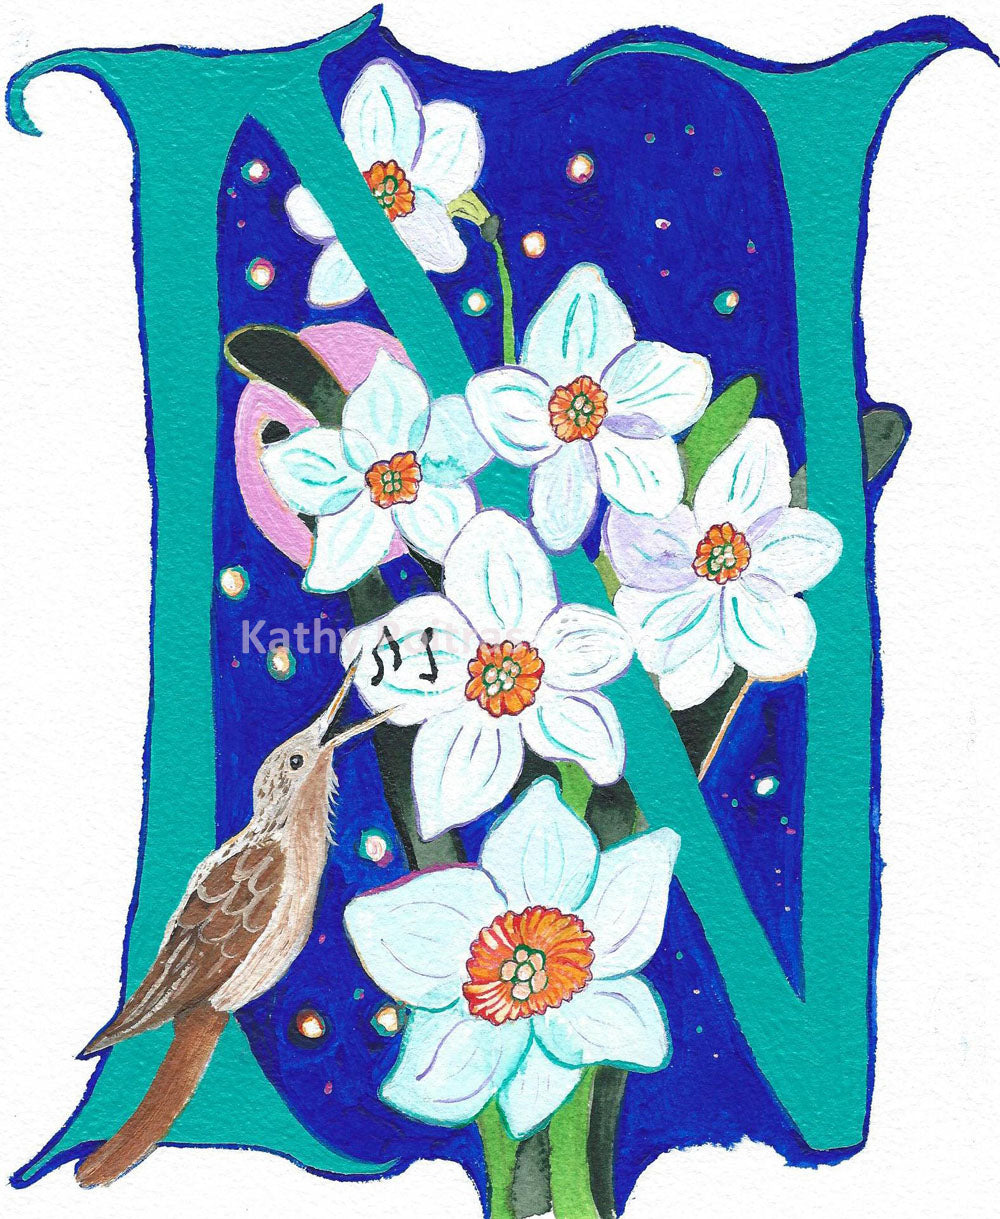 N is for Nightingale,  Narcissus flowers,  signed  print on fine art inkjet paper